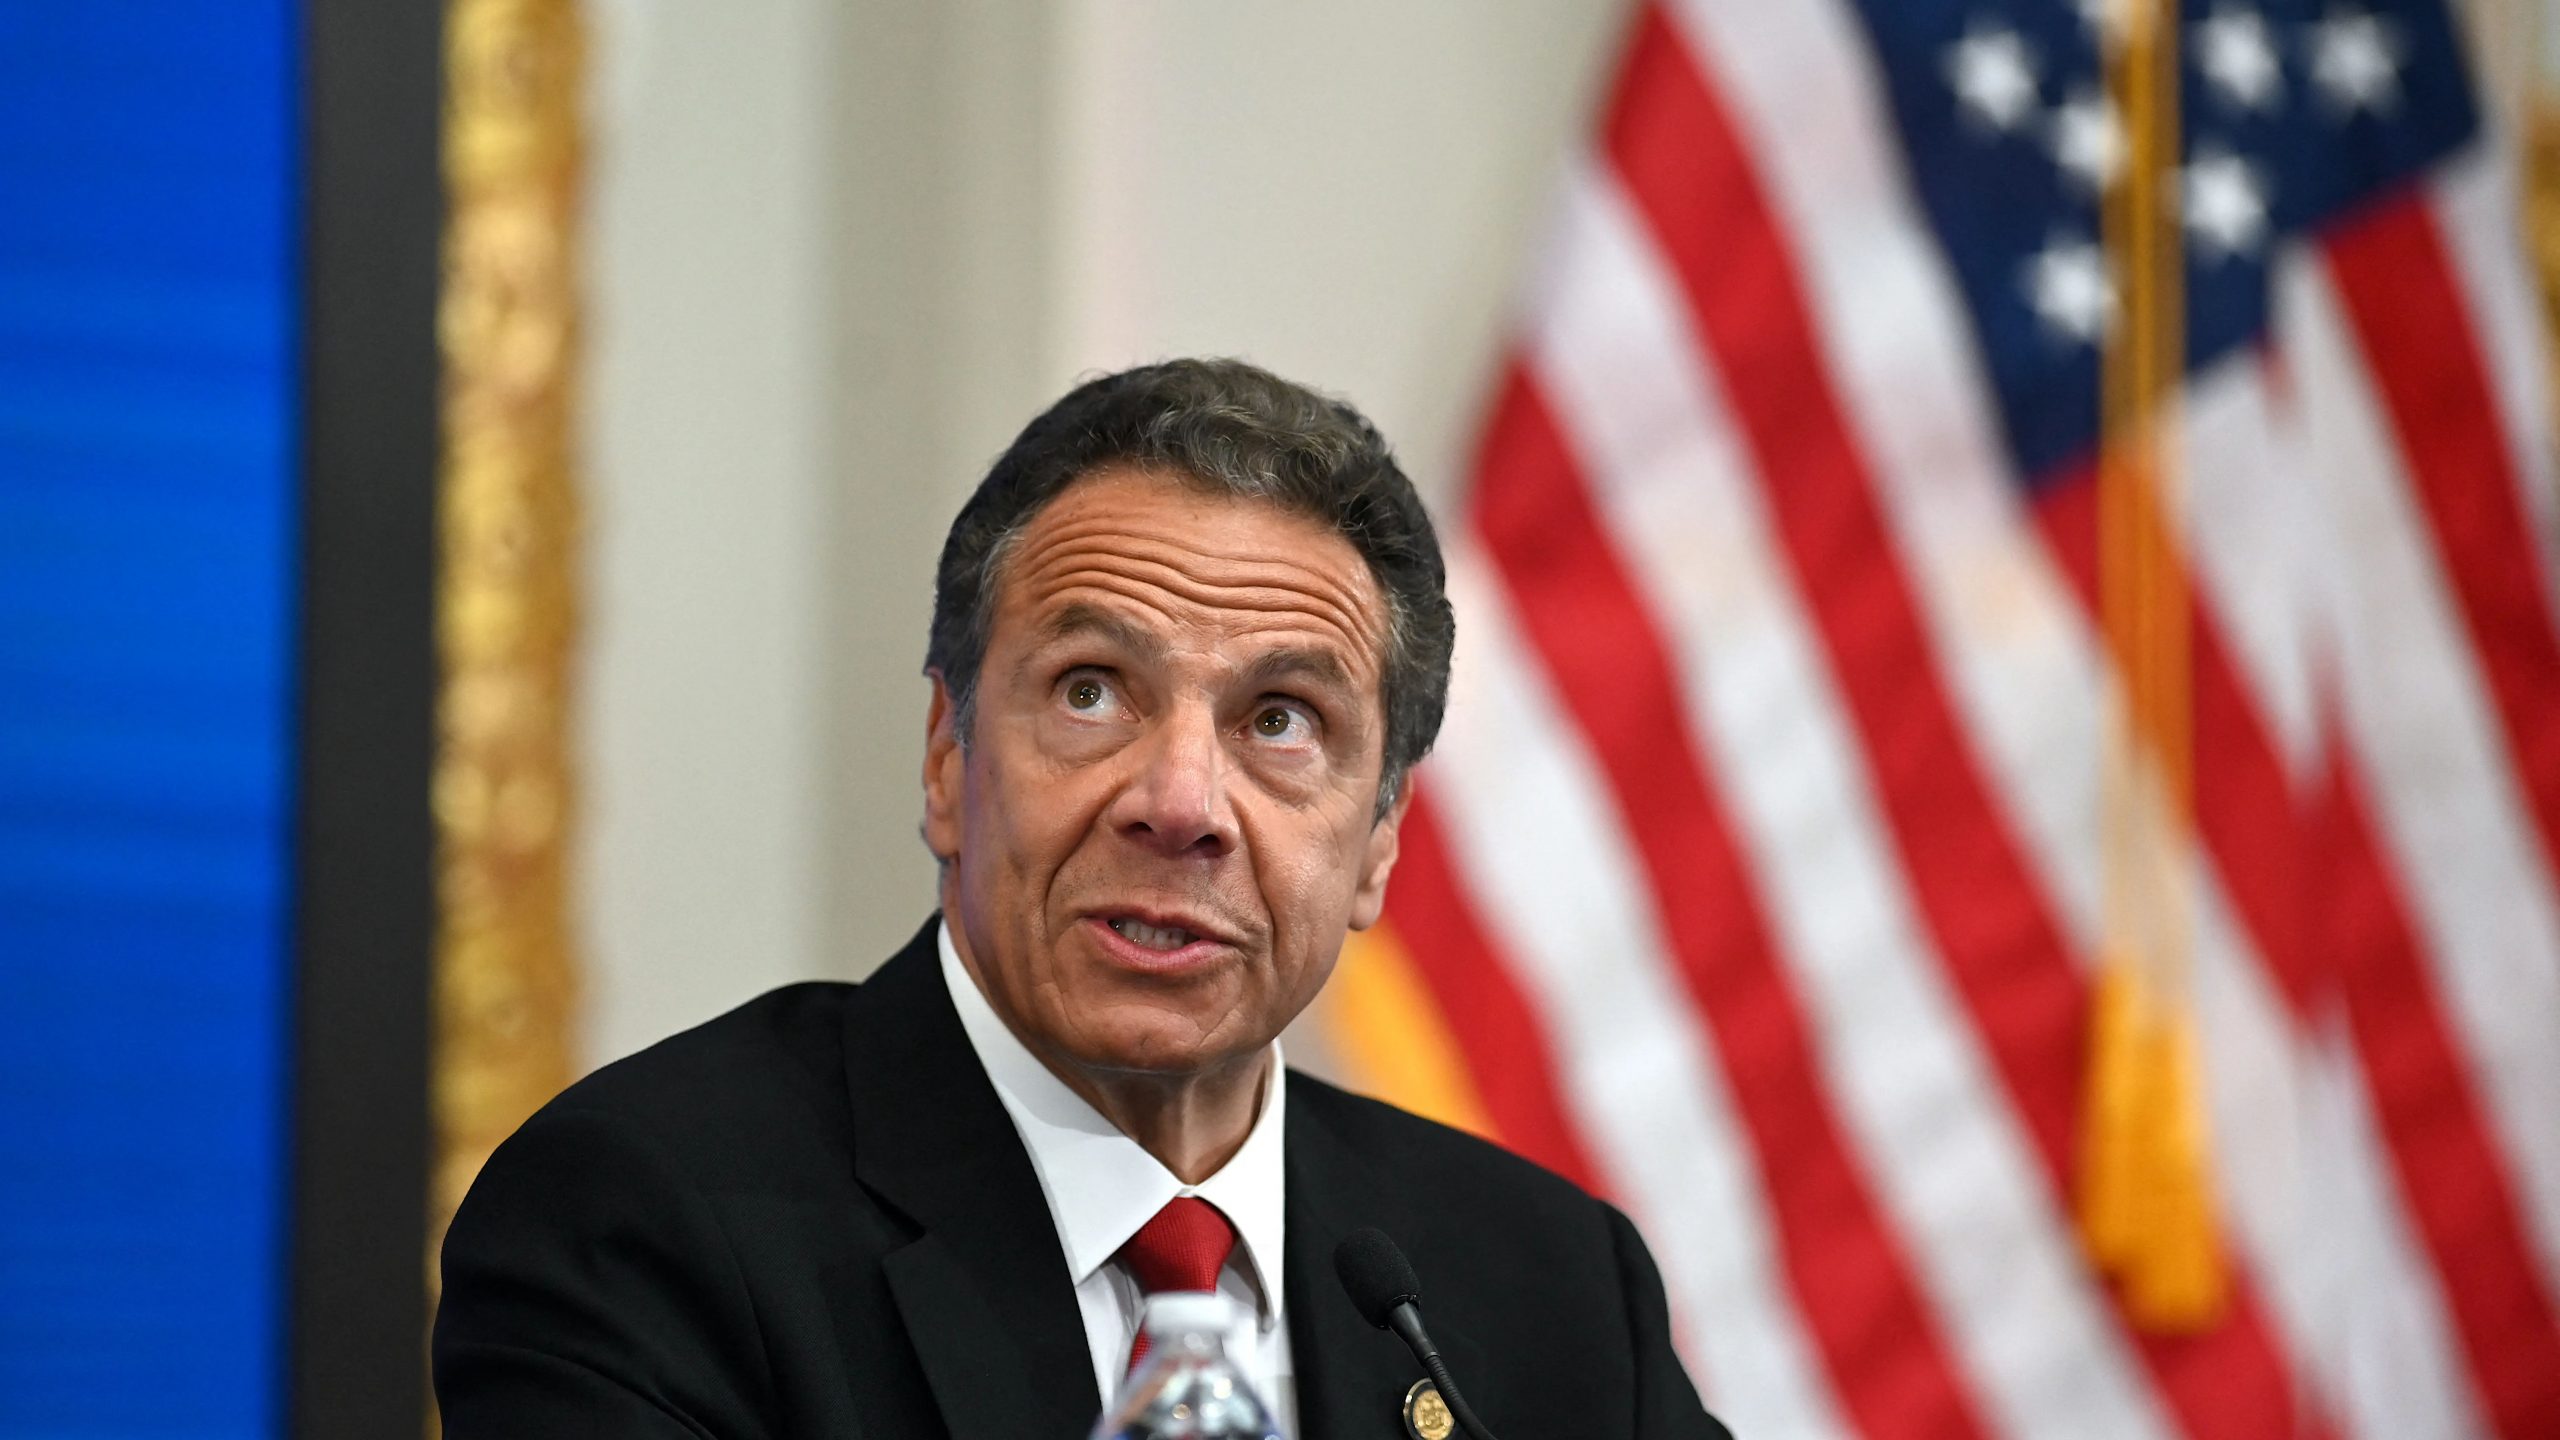 ‘Never touched anyone inappropriately’: says Andrew Cuomo, intends to remain in office